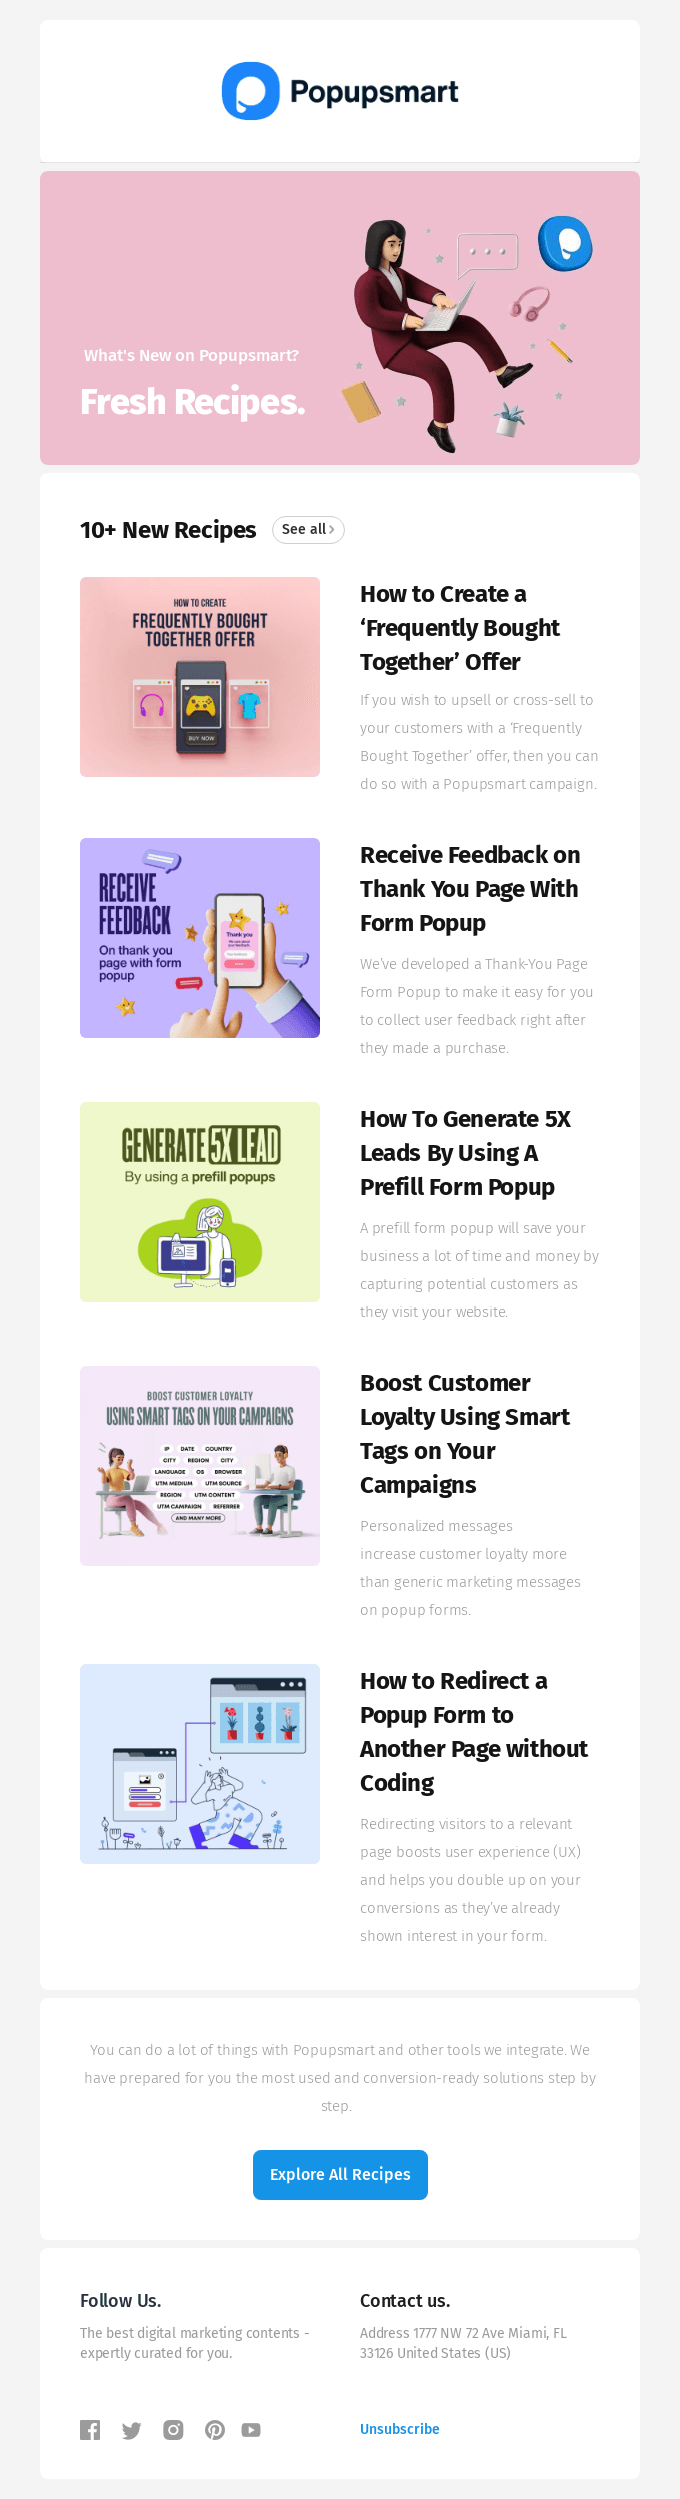 What's New on Popupsmart? Fresh Recipes To Increase Sales & Customer Engagement! - Popupsmart Email Newsletter